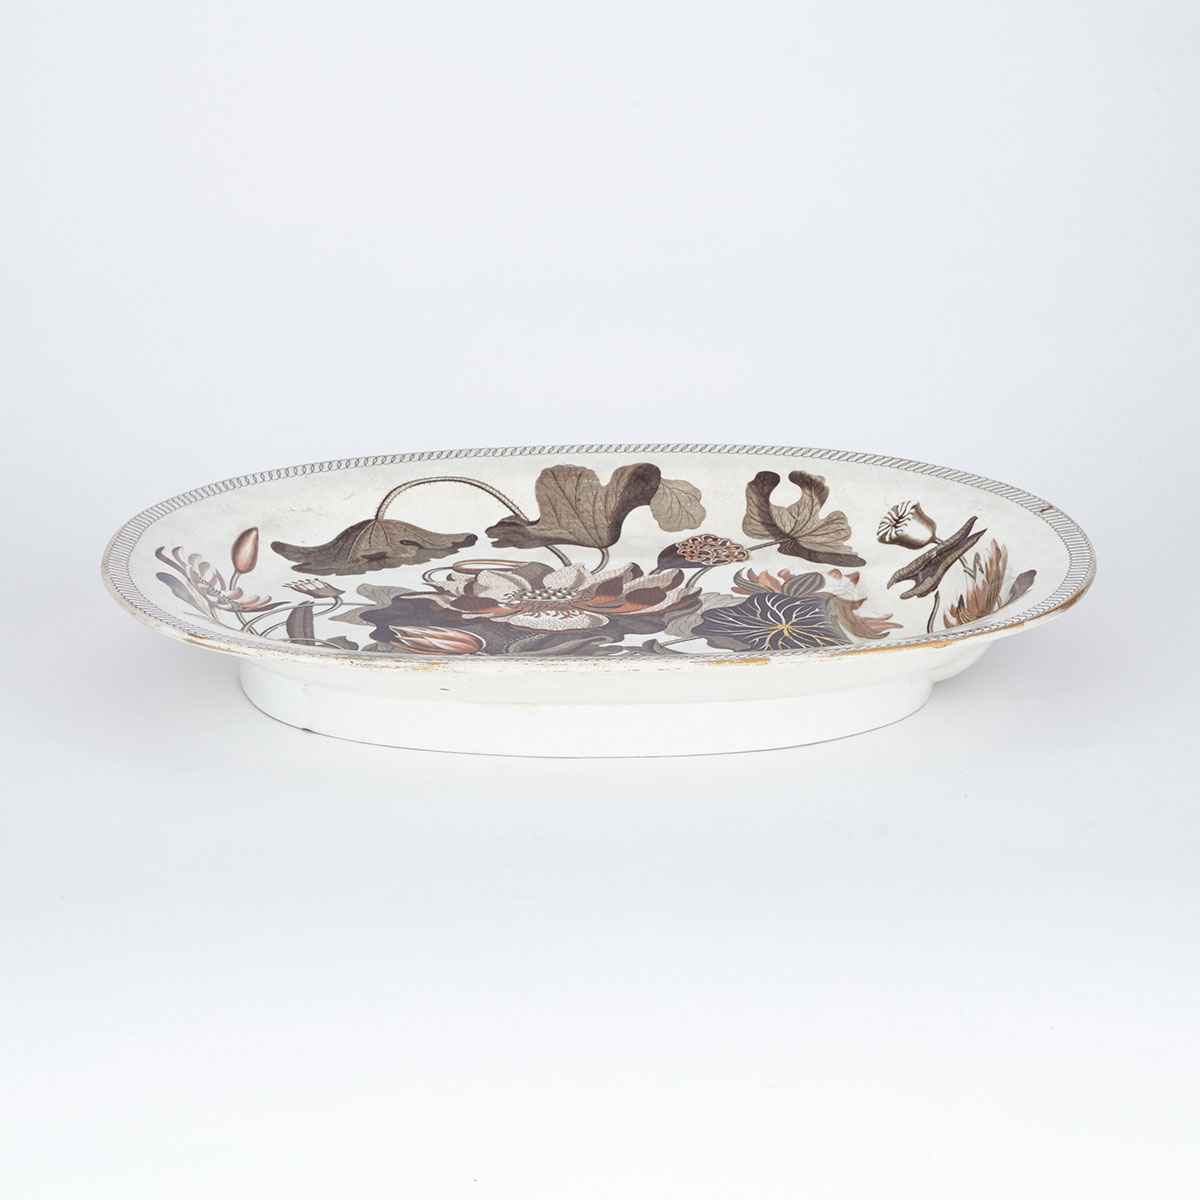 Wedgwood ‘Water Lily’ Pattern Oval Platter, c.1808-11